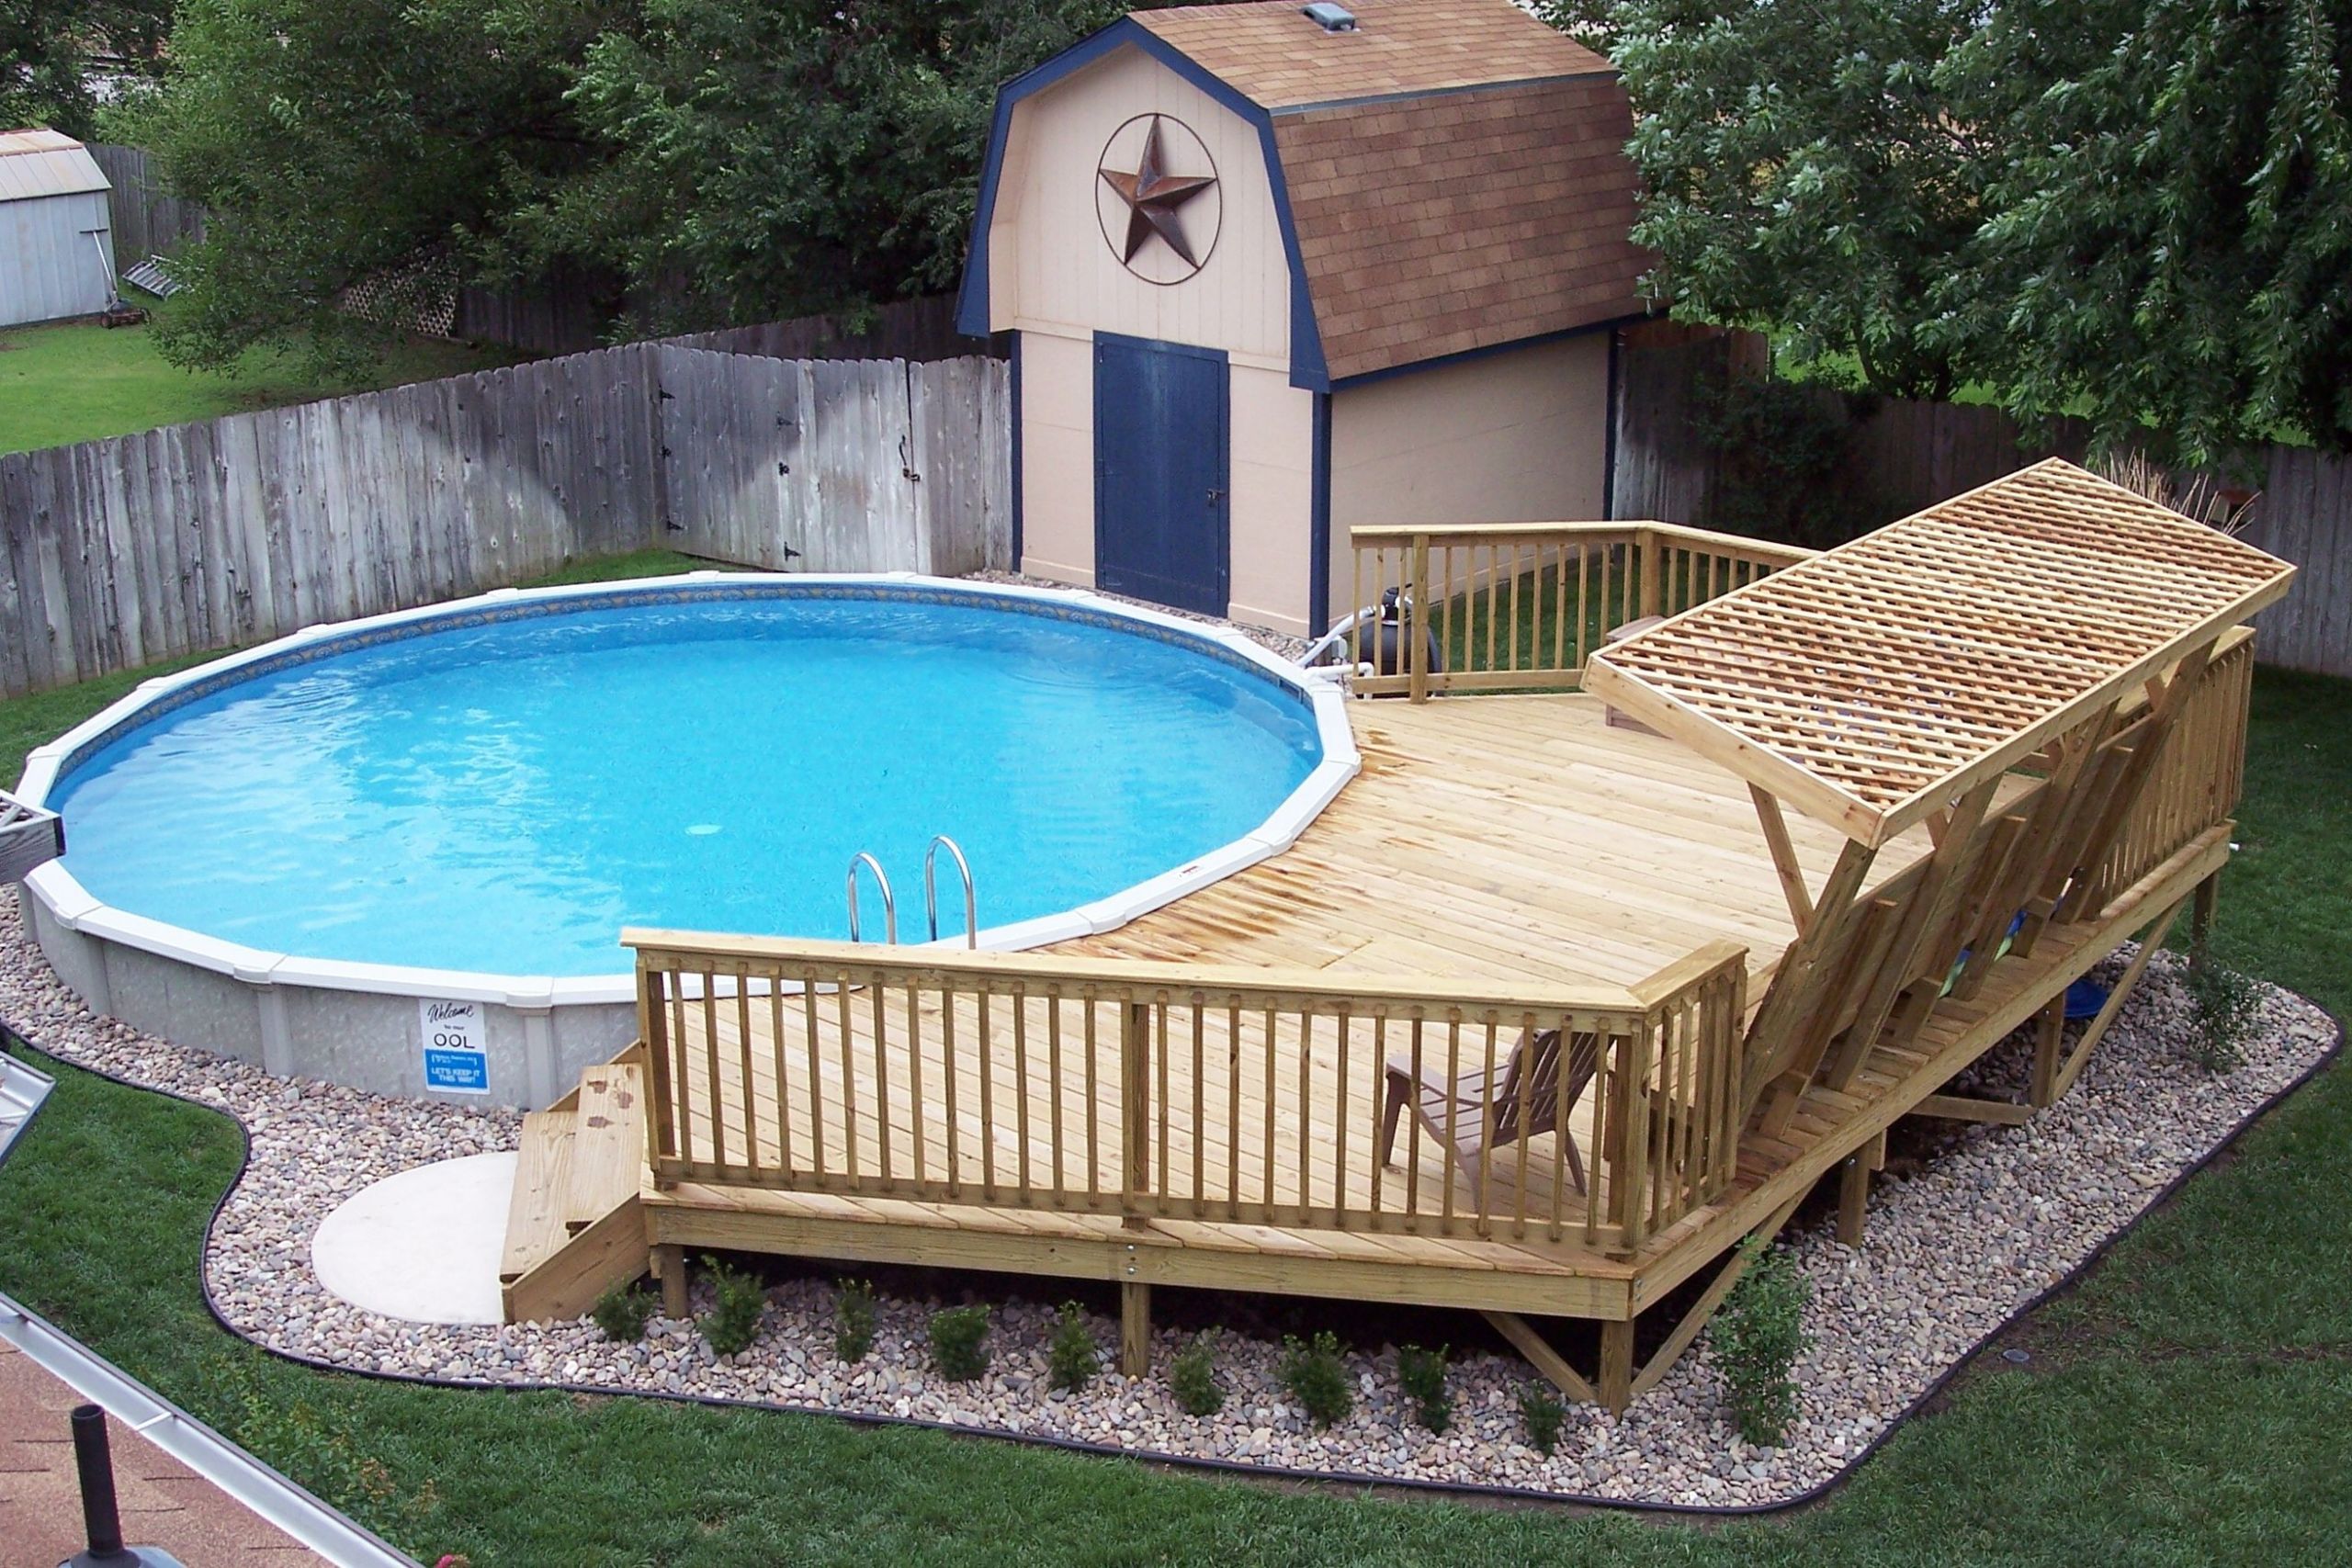 Above Ground Pool Deck Ideas
 View of 24 round 52" tall above ground pool that is sunk